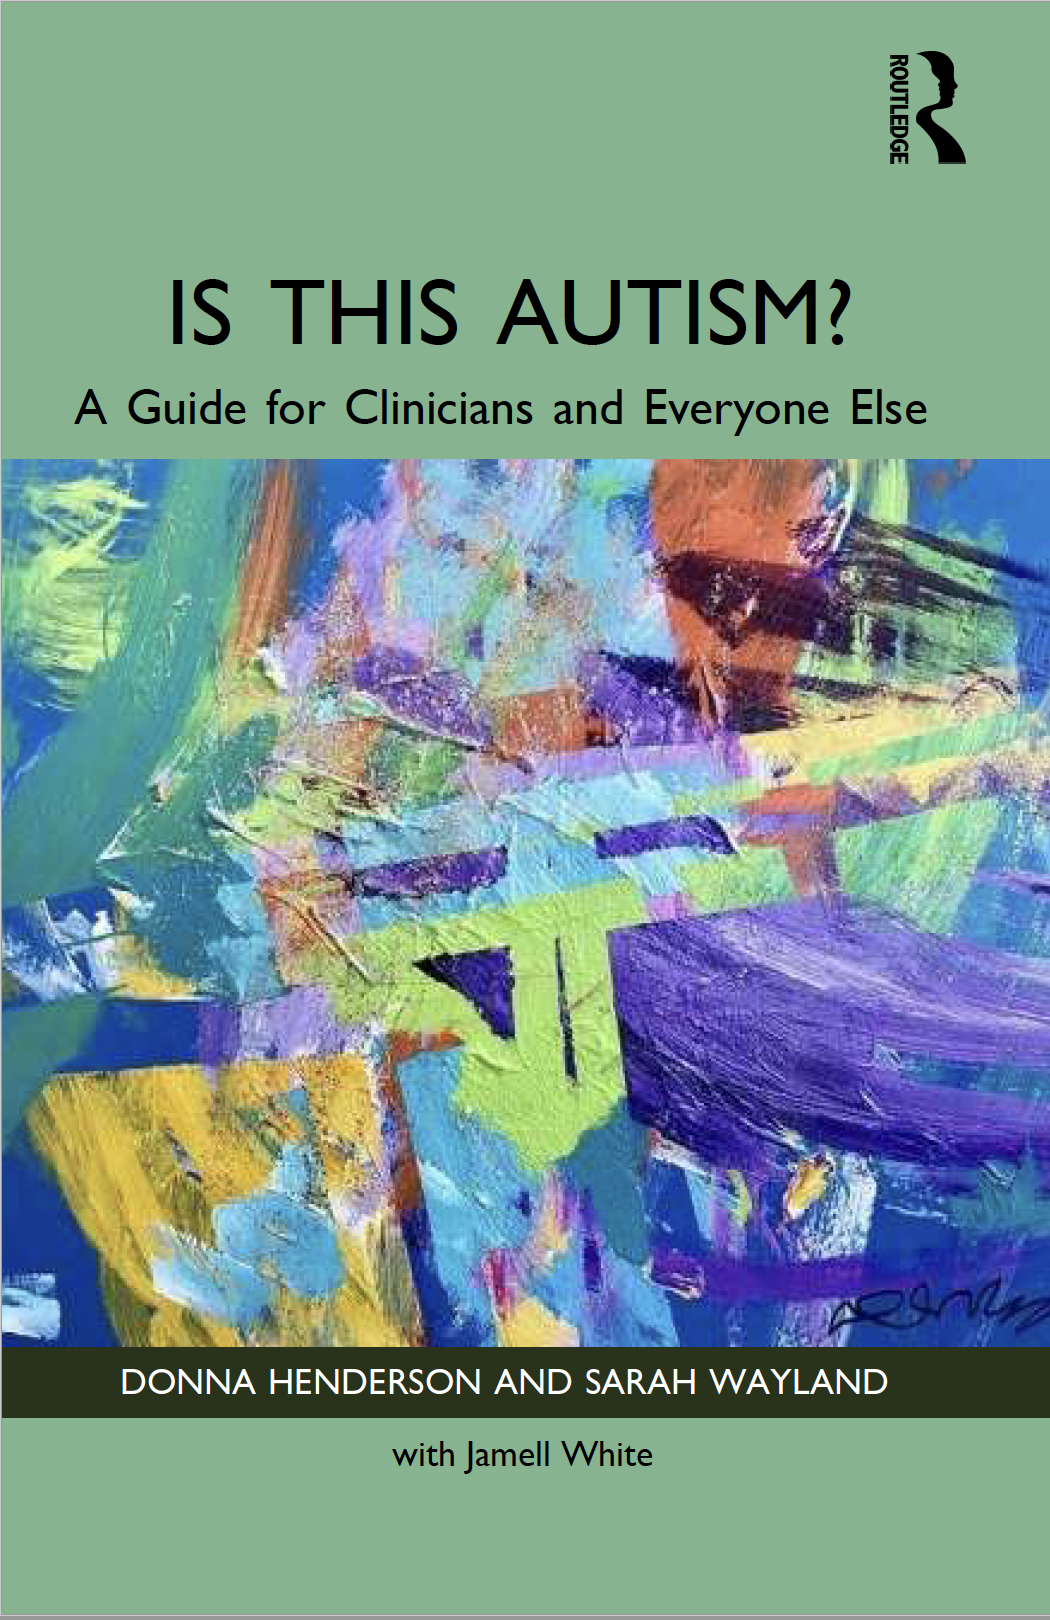 Book Cover for Is This Autism? A Guide for Clinicians and Everyone Else - cover art is an abstract painting with purples, blues, greens and yellows by Jeremy Sicile-Kira called My Amazing Team.